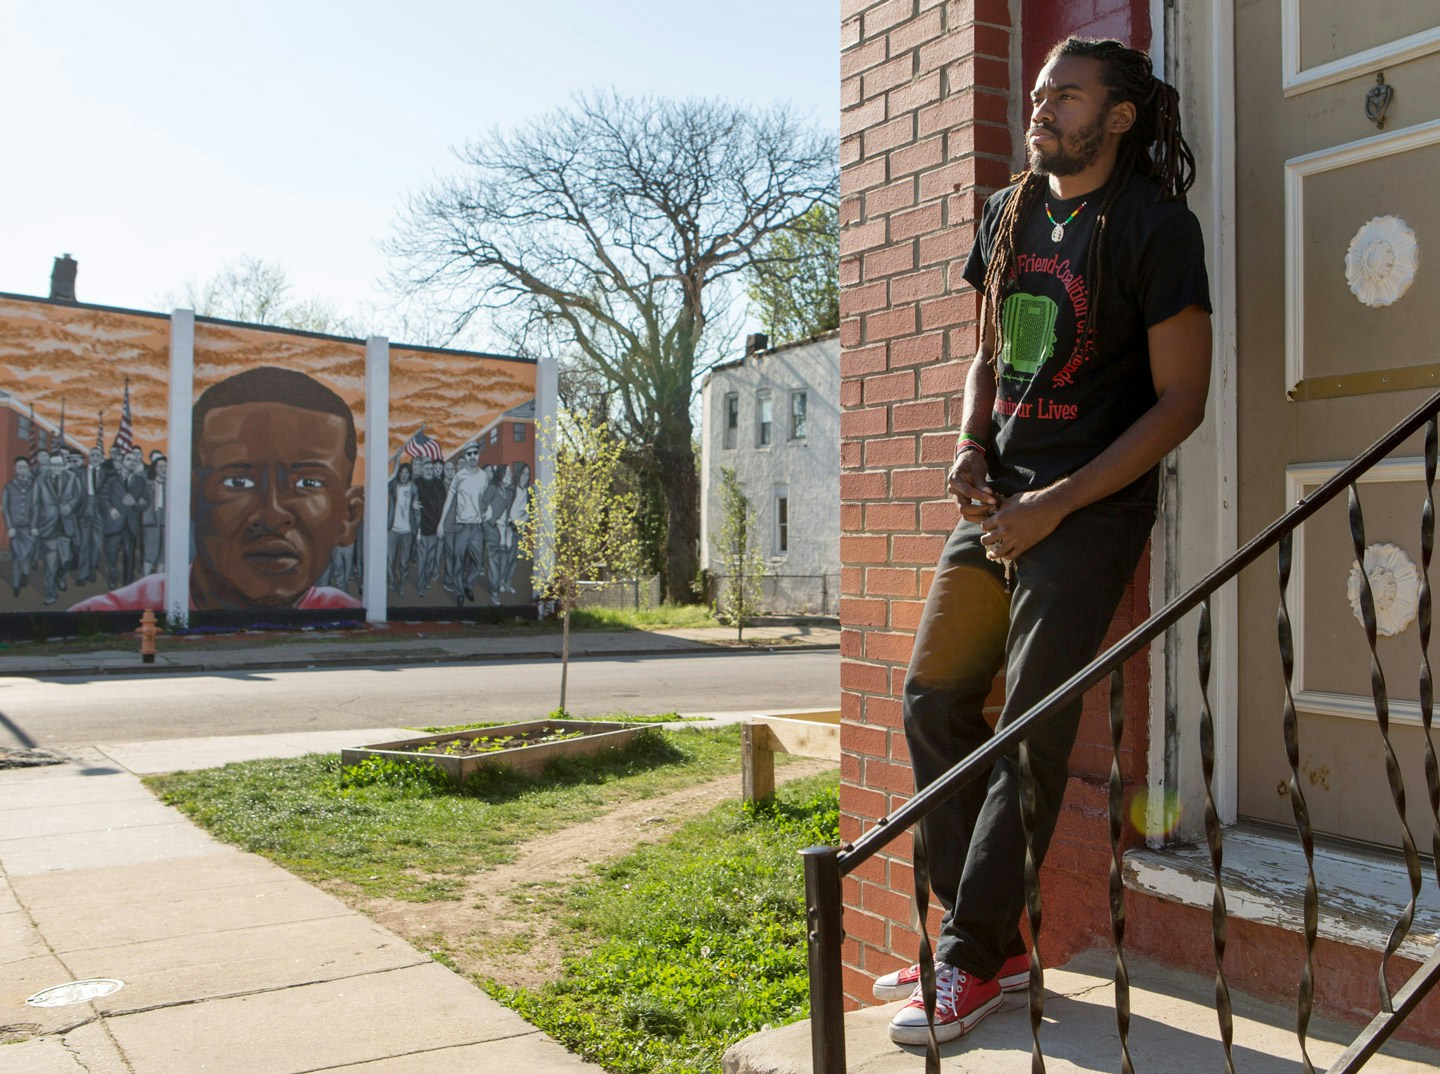 Attorney and activist Taalib Saber poses for a photo outside a house that is across the street from where Freddie Gray, who died while in police custody just over one year ago, was picked up by police in Baltimore, Maryland, April 23, 2016. Saber is using the home, which he found vacant, for children's community activities. (photo by Allison Shelley)